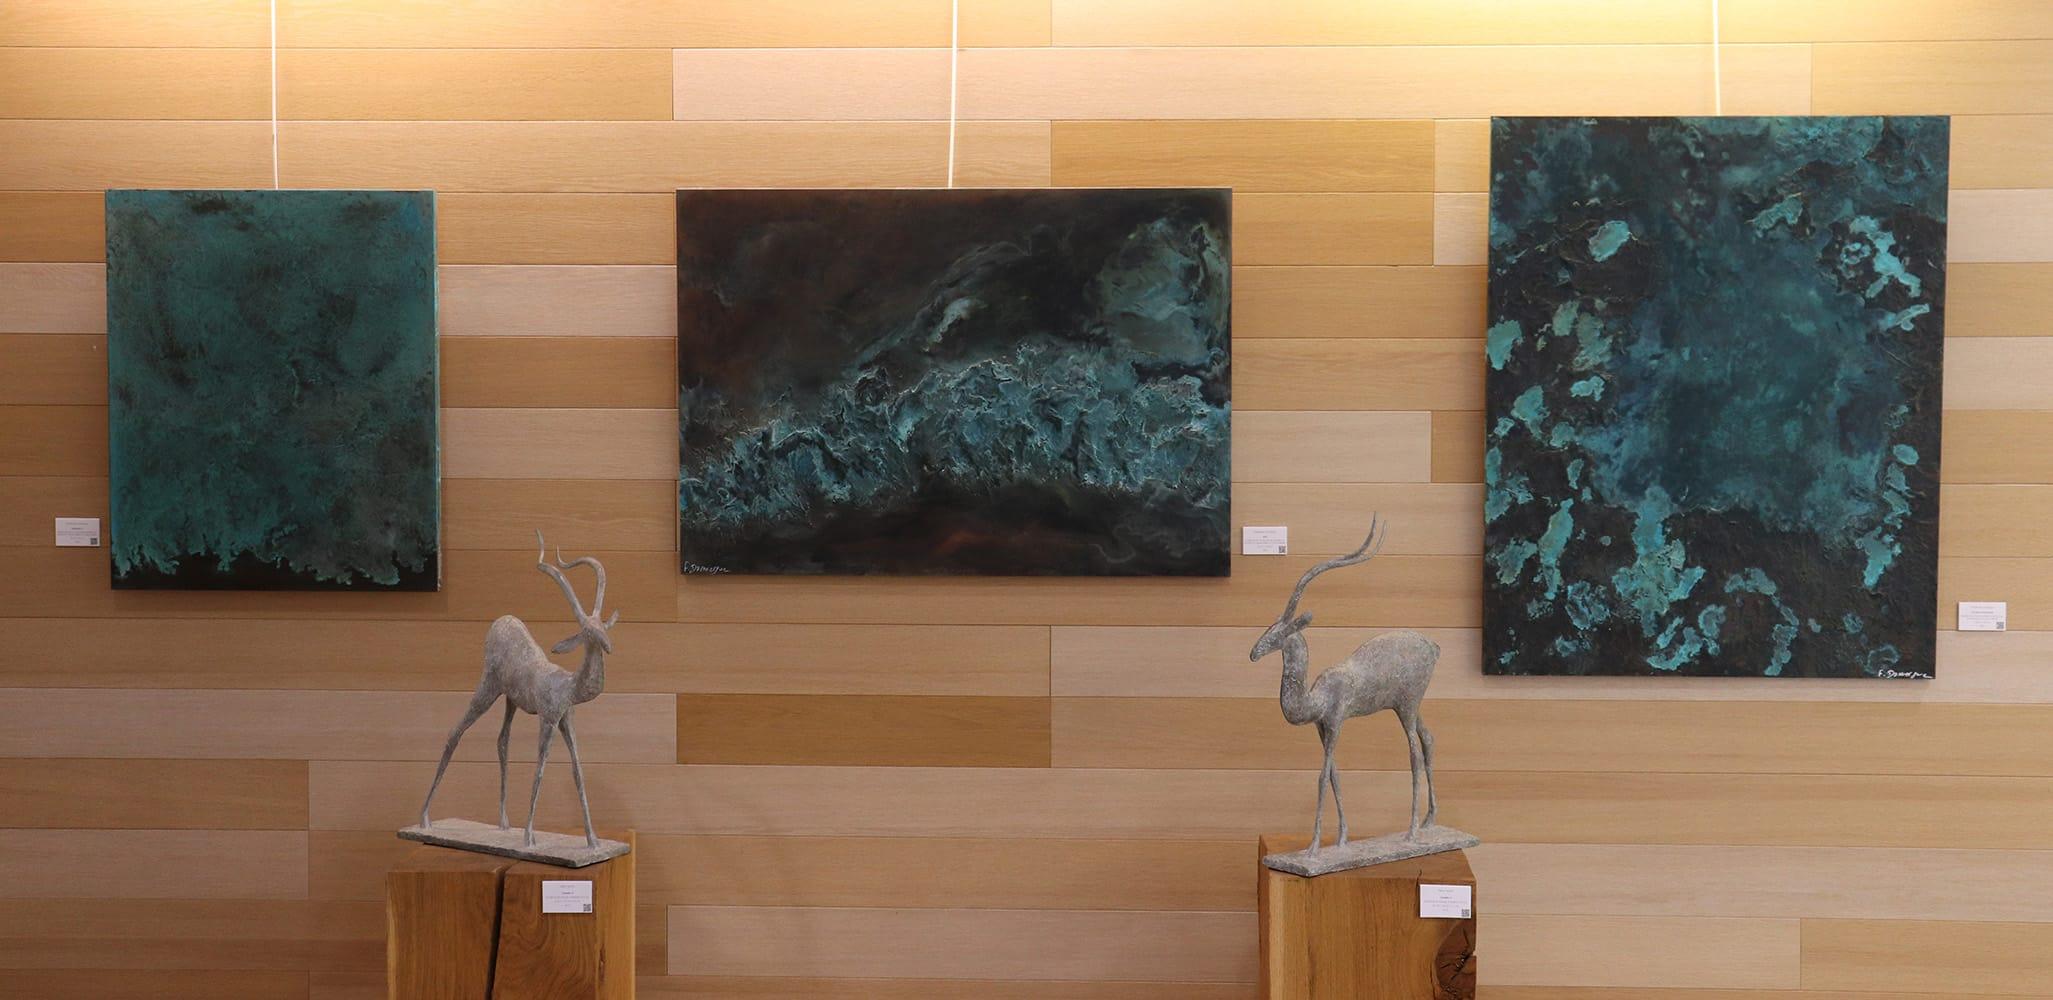 The Emerald Archipelago by Frédérique Domergue - Contemporary abstract painting For Sale 4